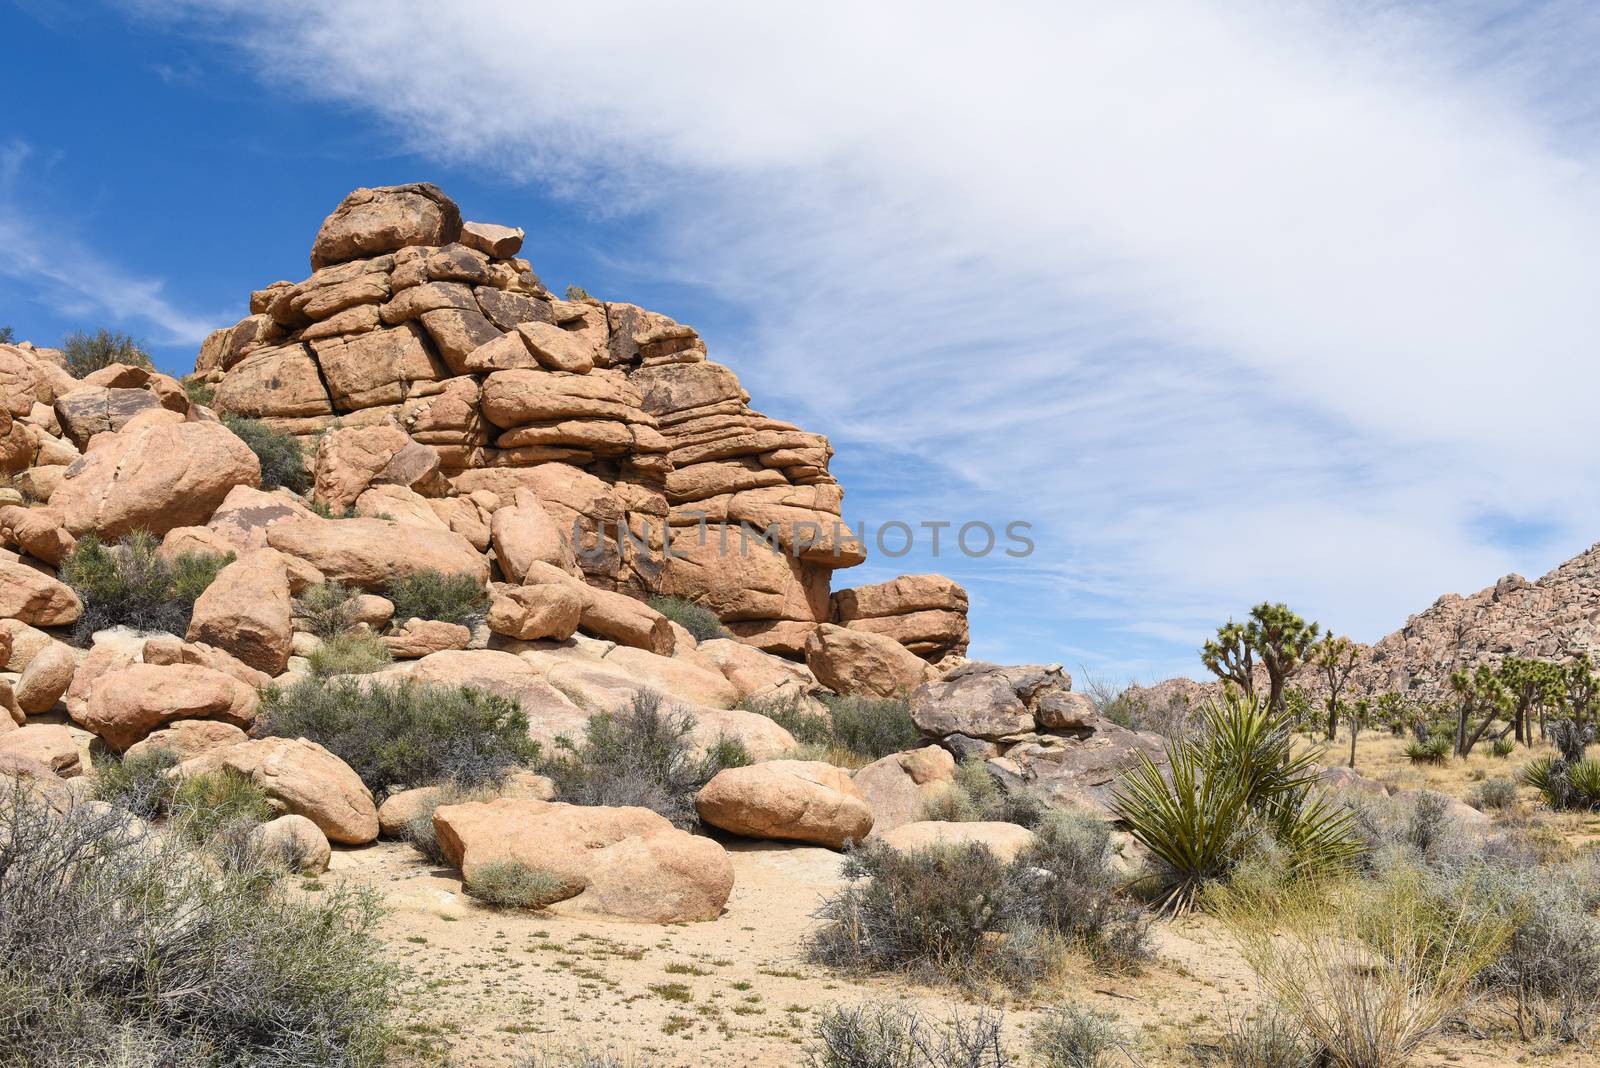 Pile of granite boulders along Boy Scout Trail in Joshua Tree Na by Njean